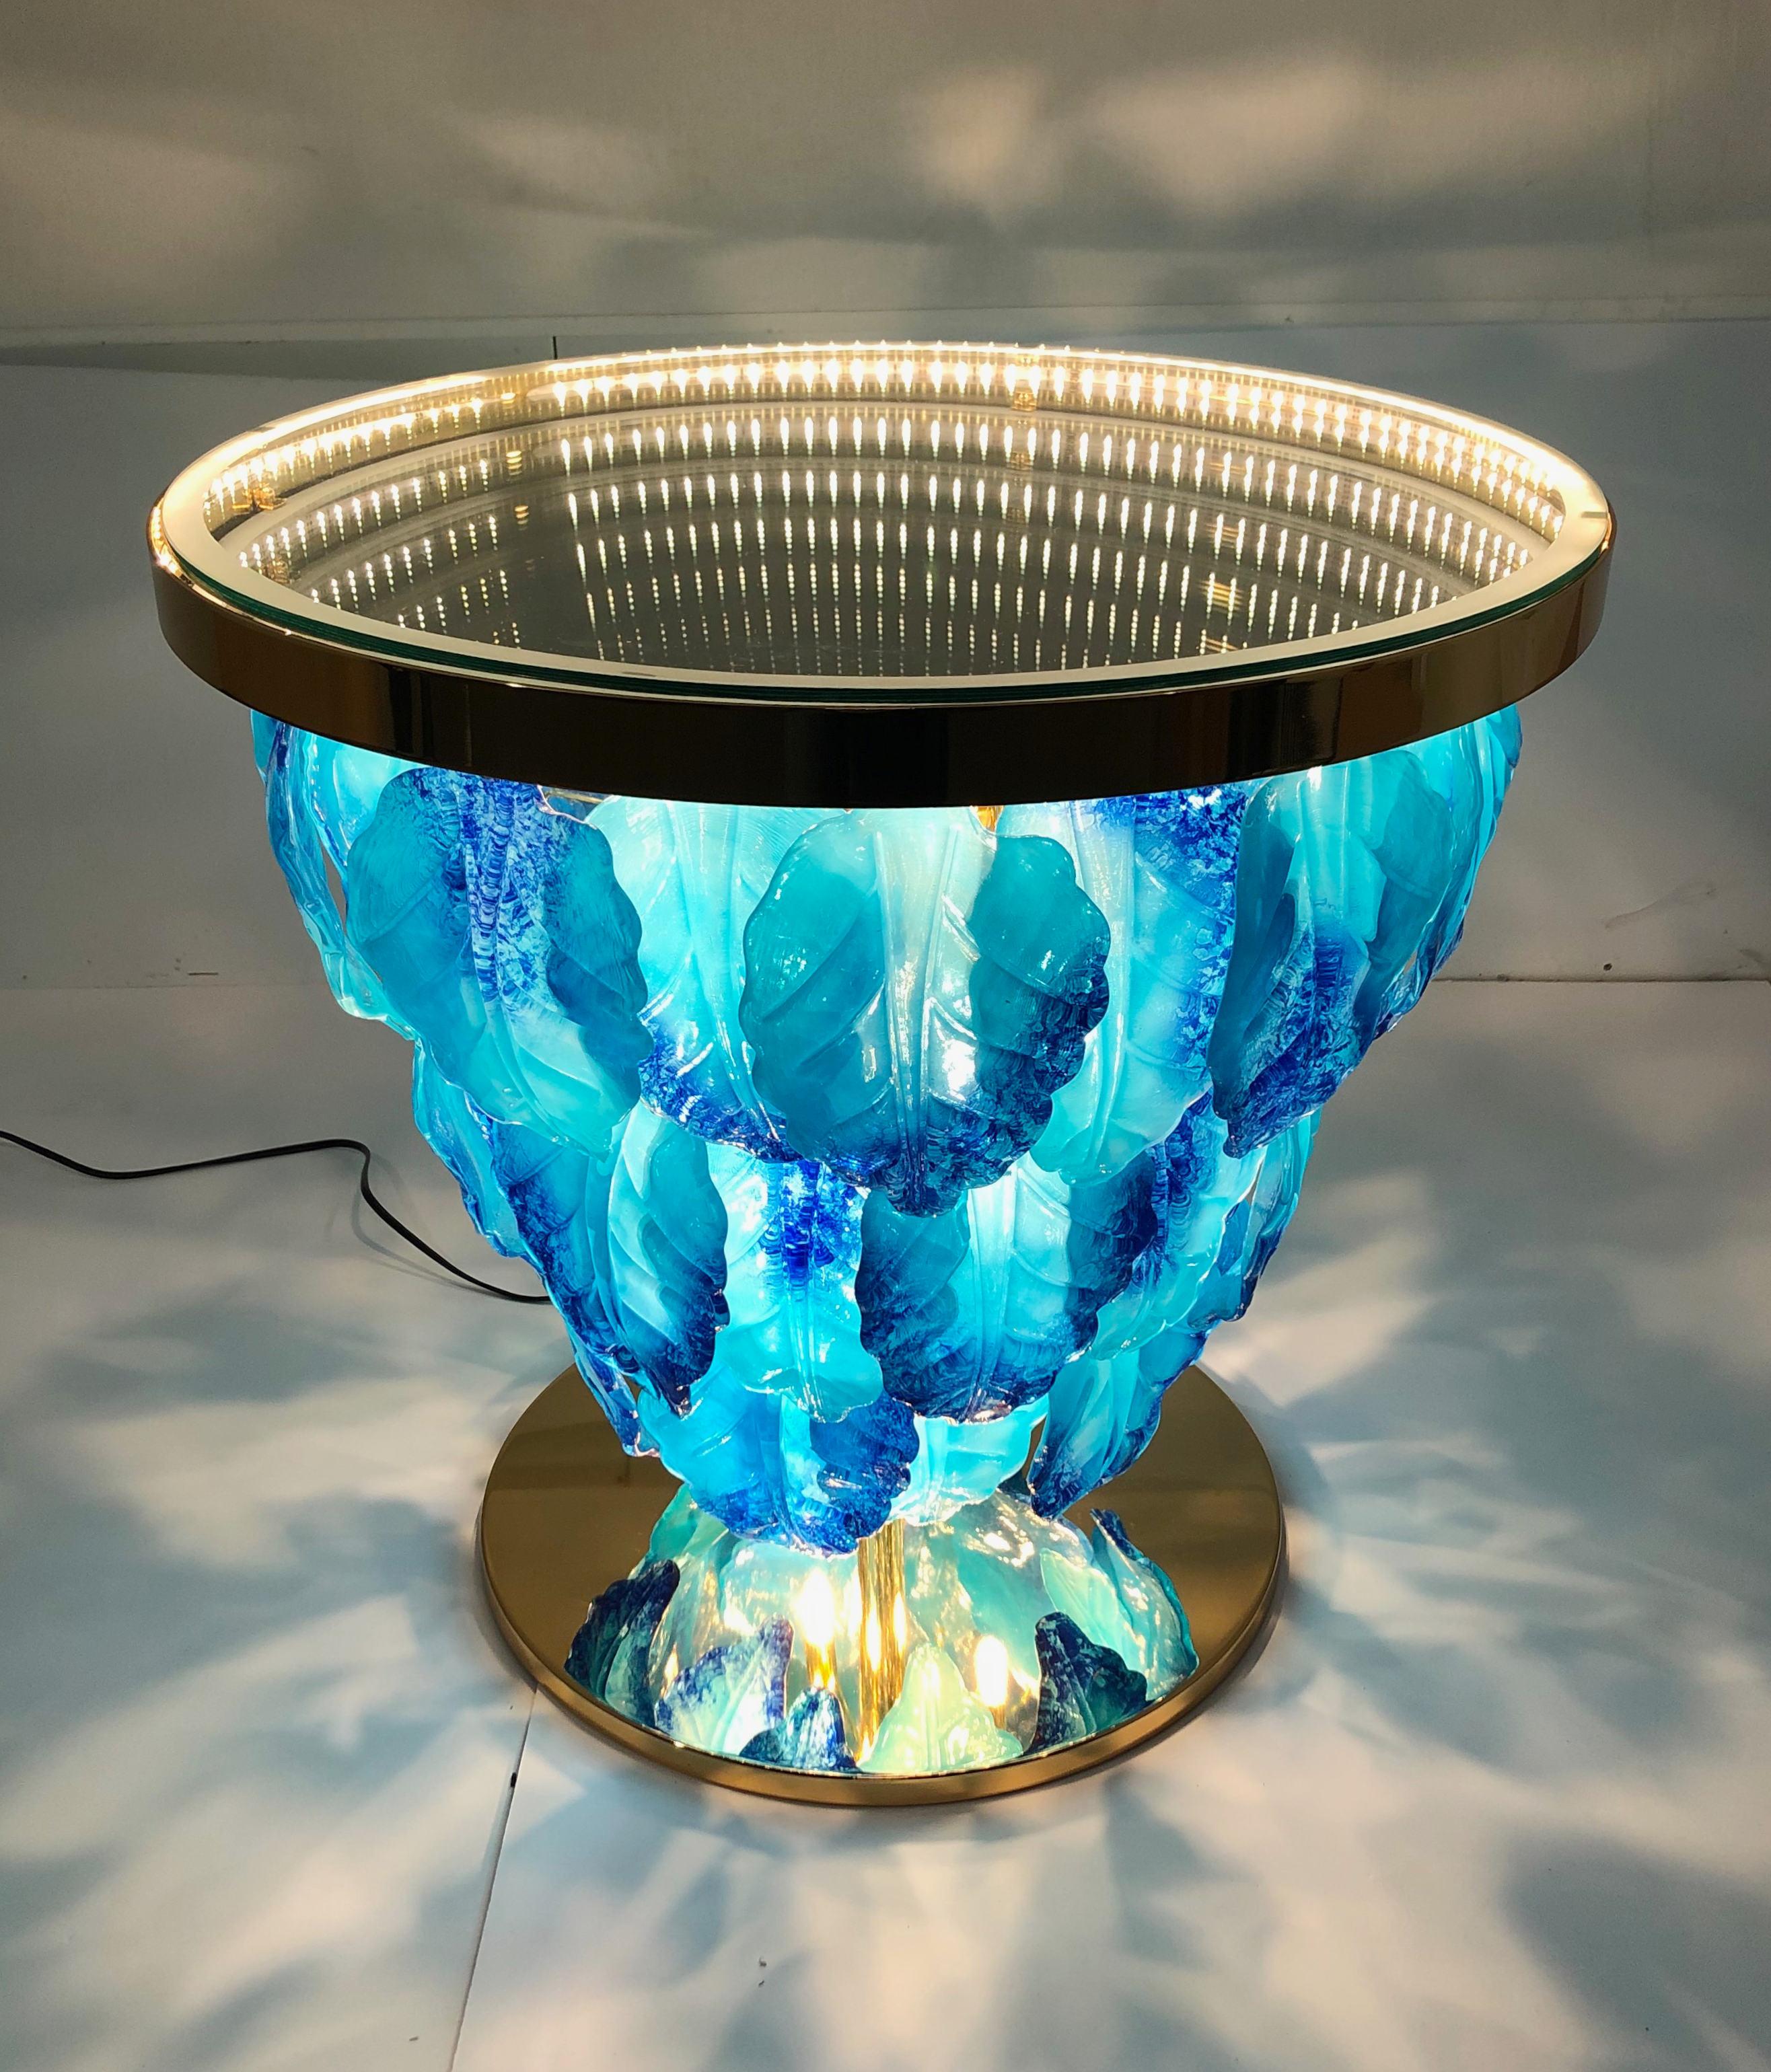 Modern Italian illuminated table with infinity lit mirror, dressed with blue and aquamarine Murano glass leaves mounted on 24K gold plated metal base / Designed by Fabio Bergomi for Fabio Ltd / Made in Italy
LED type lights
Diameter: 27.5 inches /